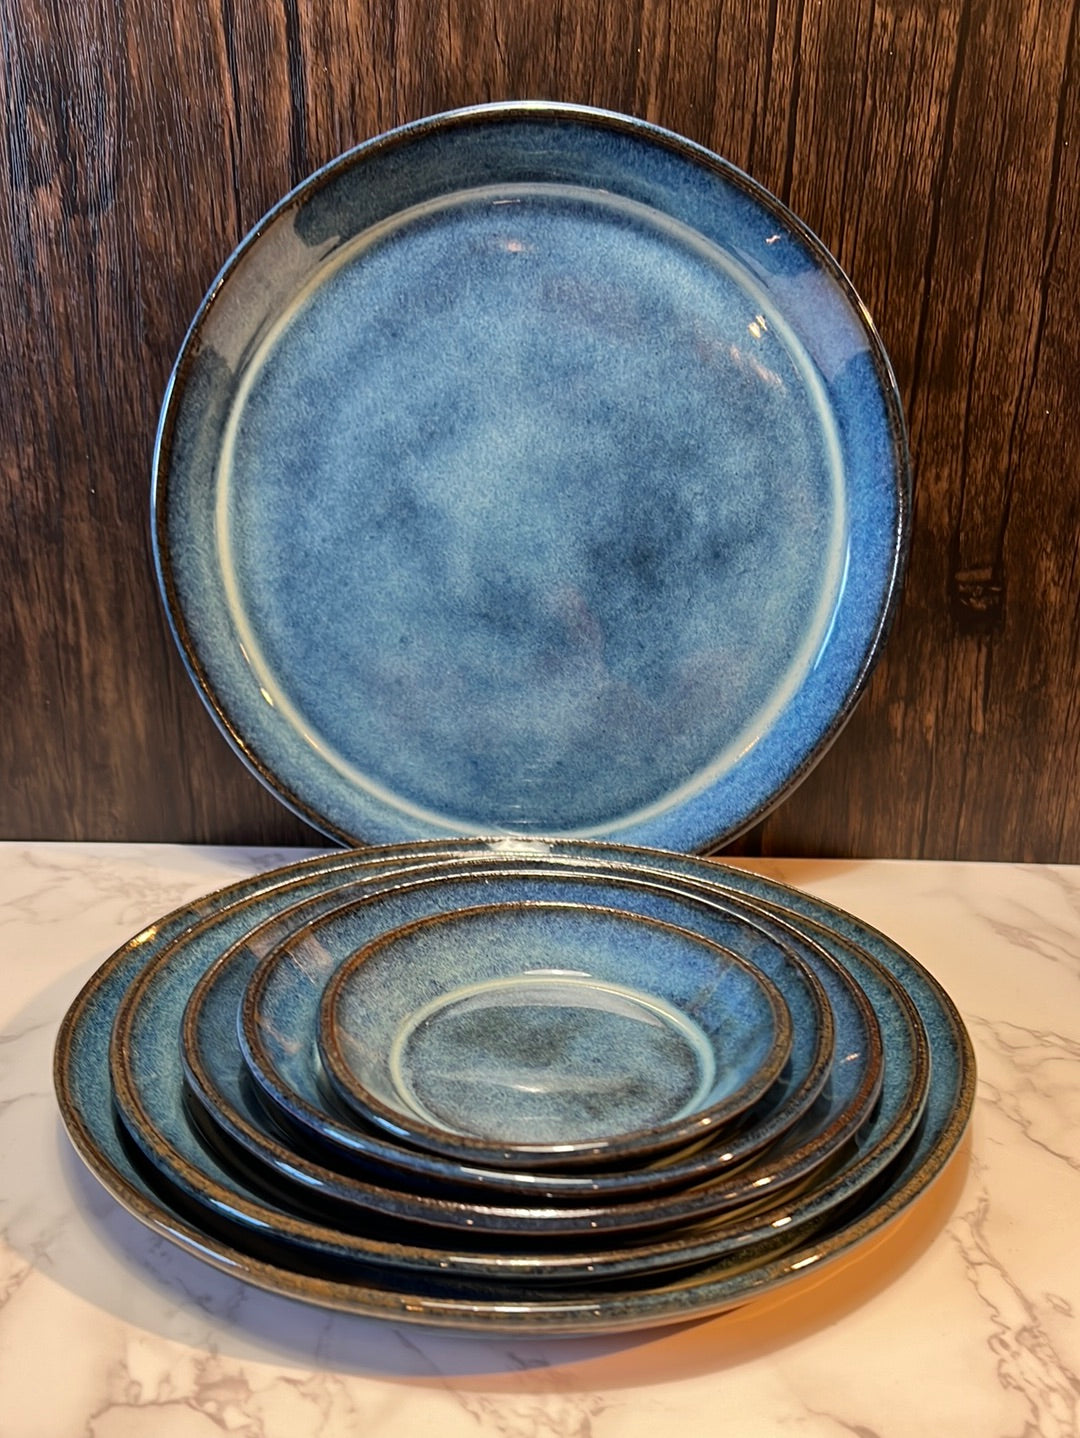 8” Dinner Plate | ROCK HOME Deep Sea Collection